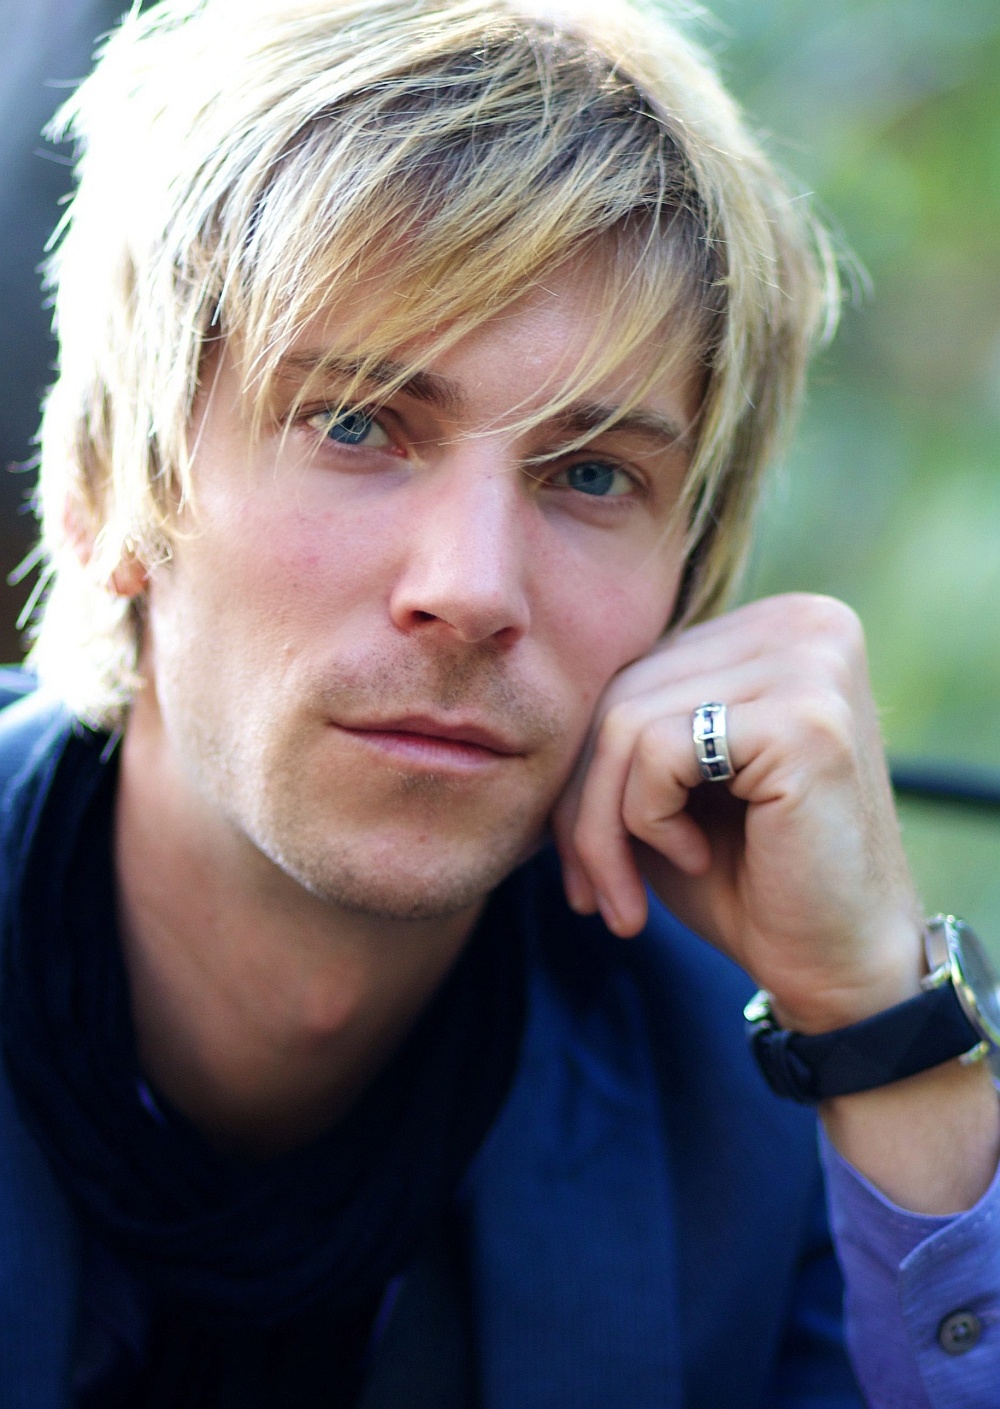 Troy Baker on Acting in Video Games